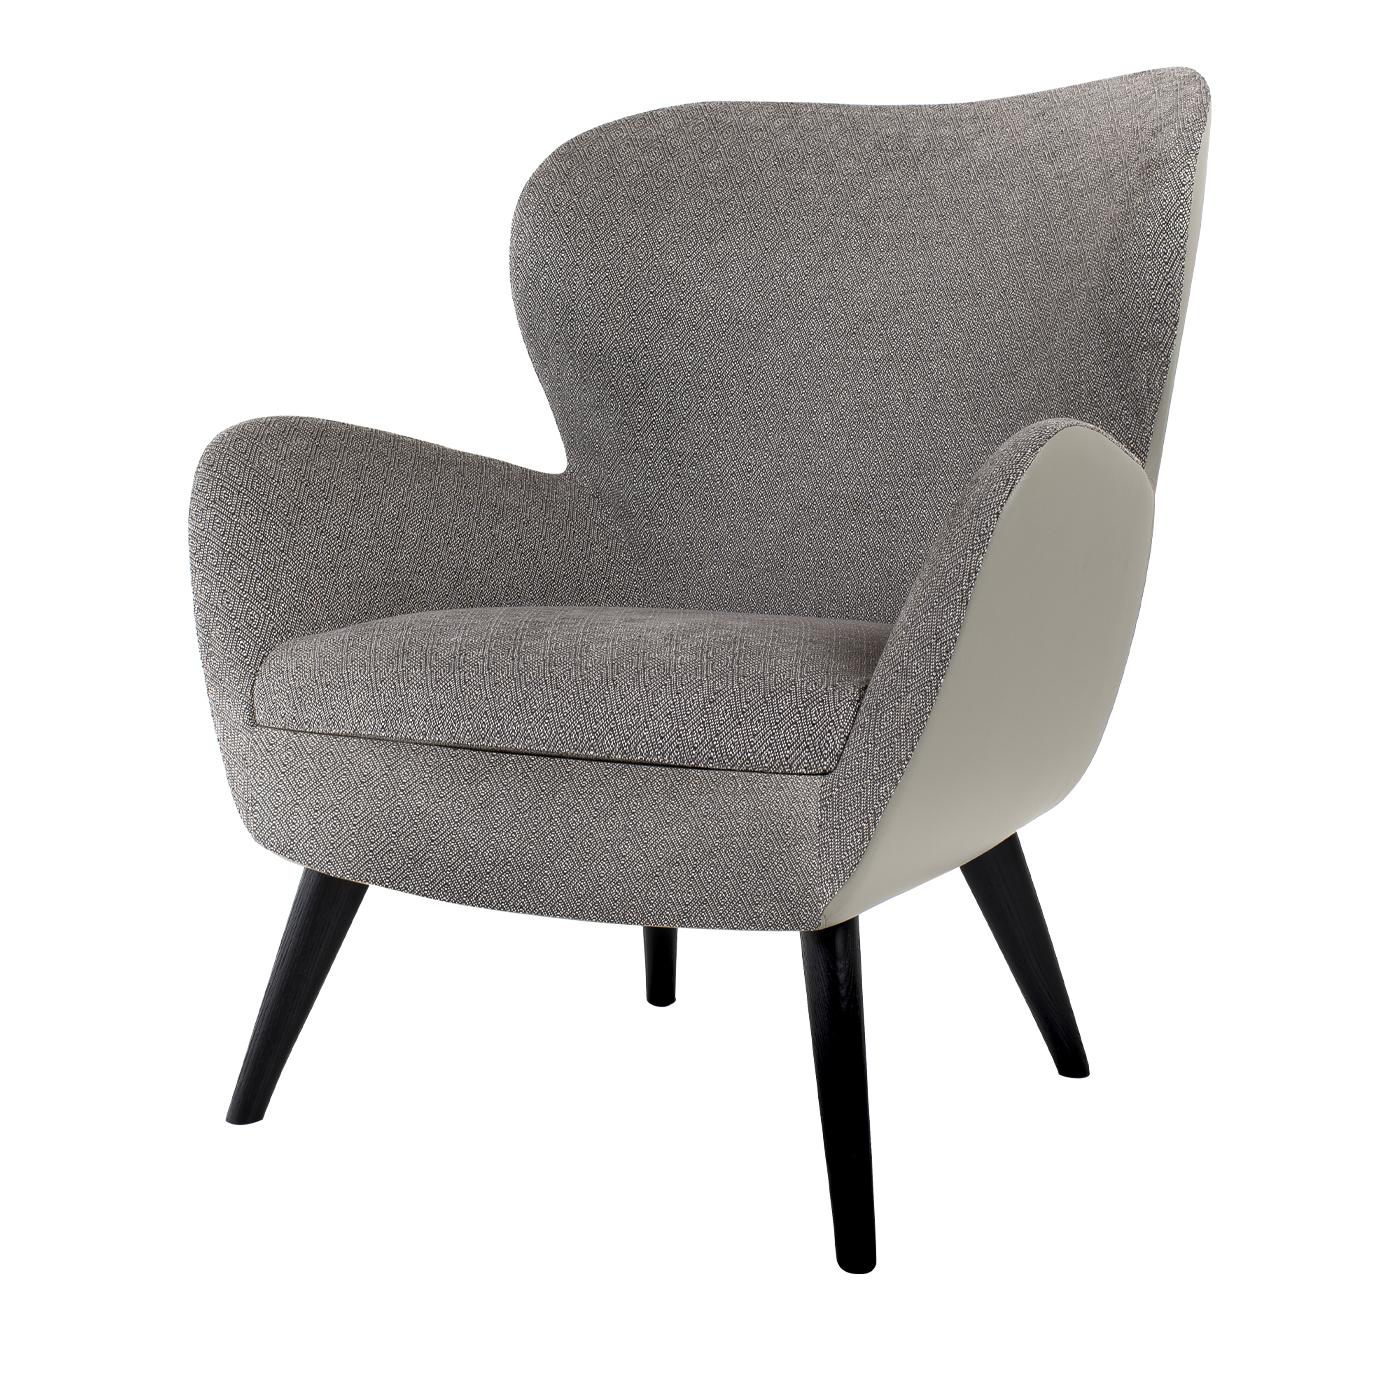 This retro style armchair with a 1960s inspired design elegantly combines an external leather layer and an internal fabric one, both in a stylish nuance of pewter. Well-padded, comfortable and enveloping, this chair will make a statement in your